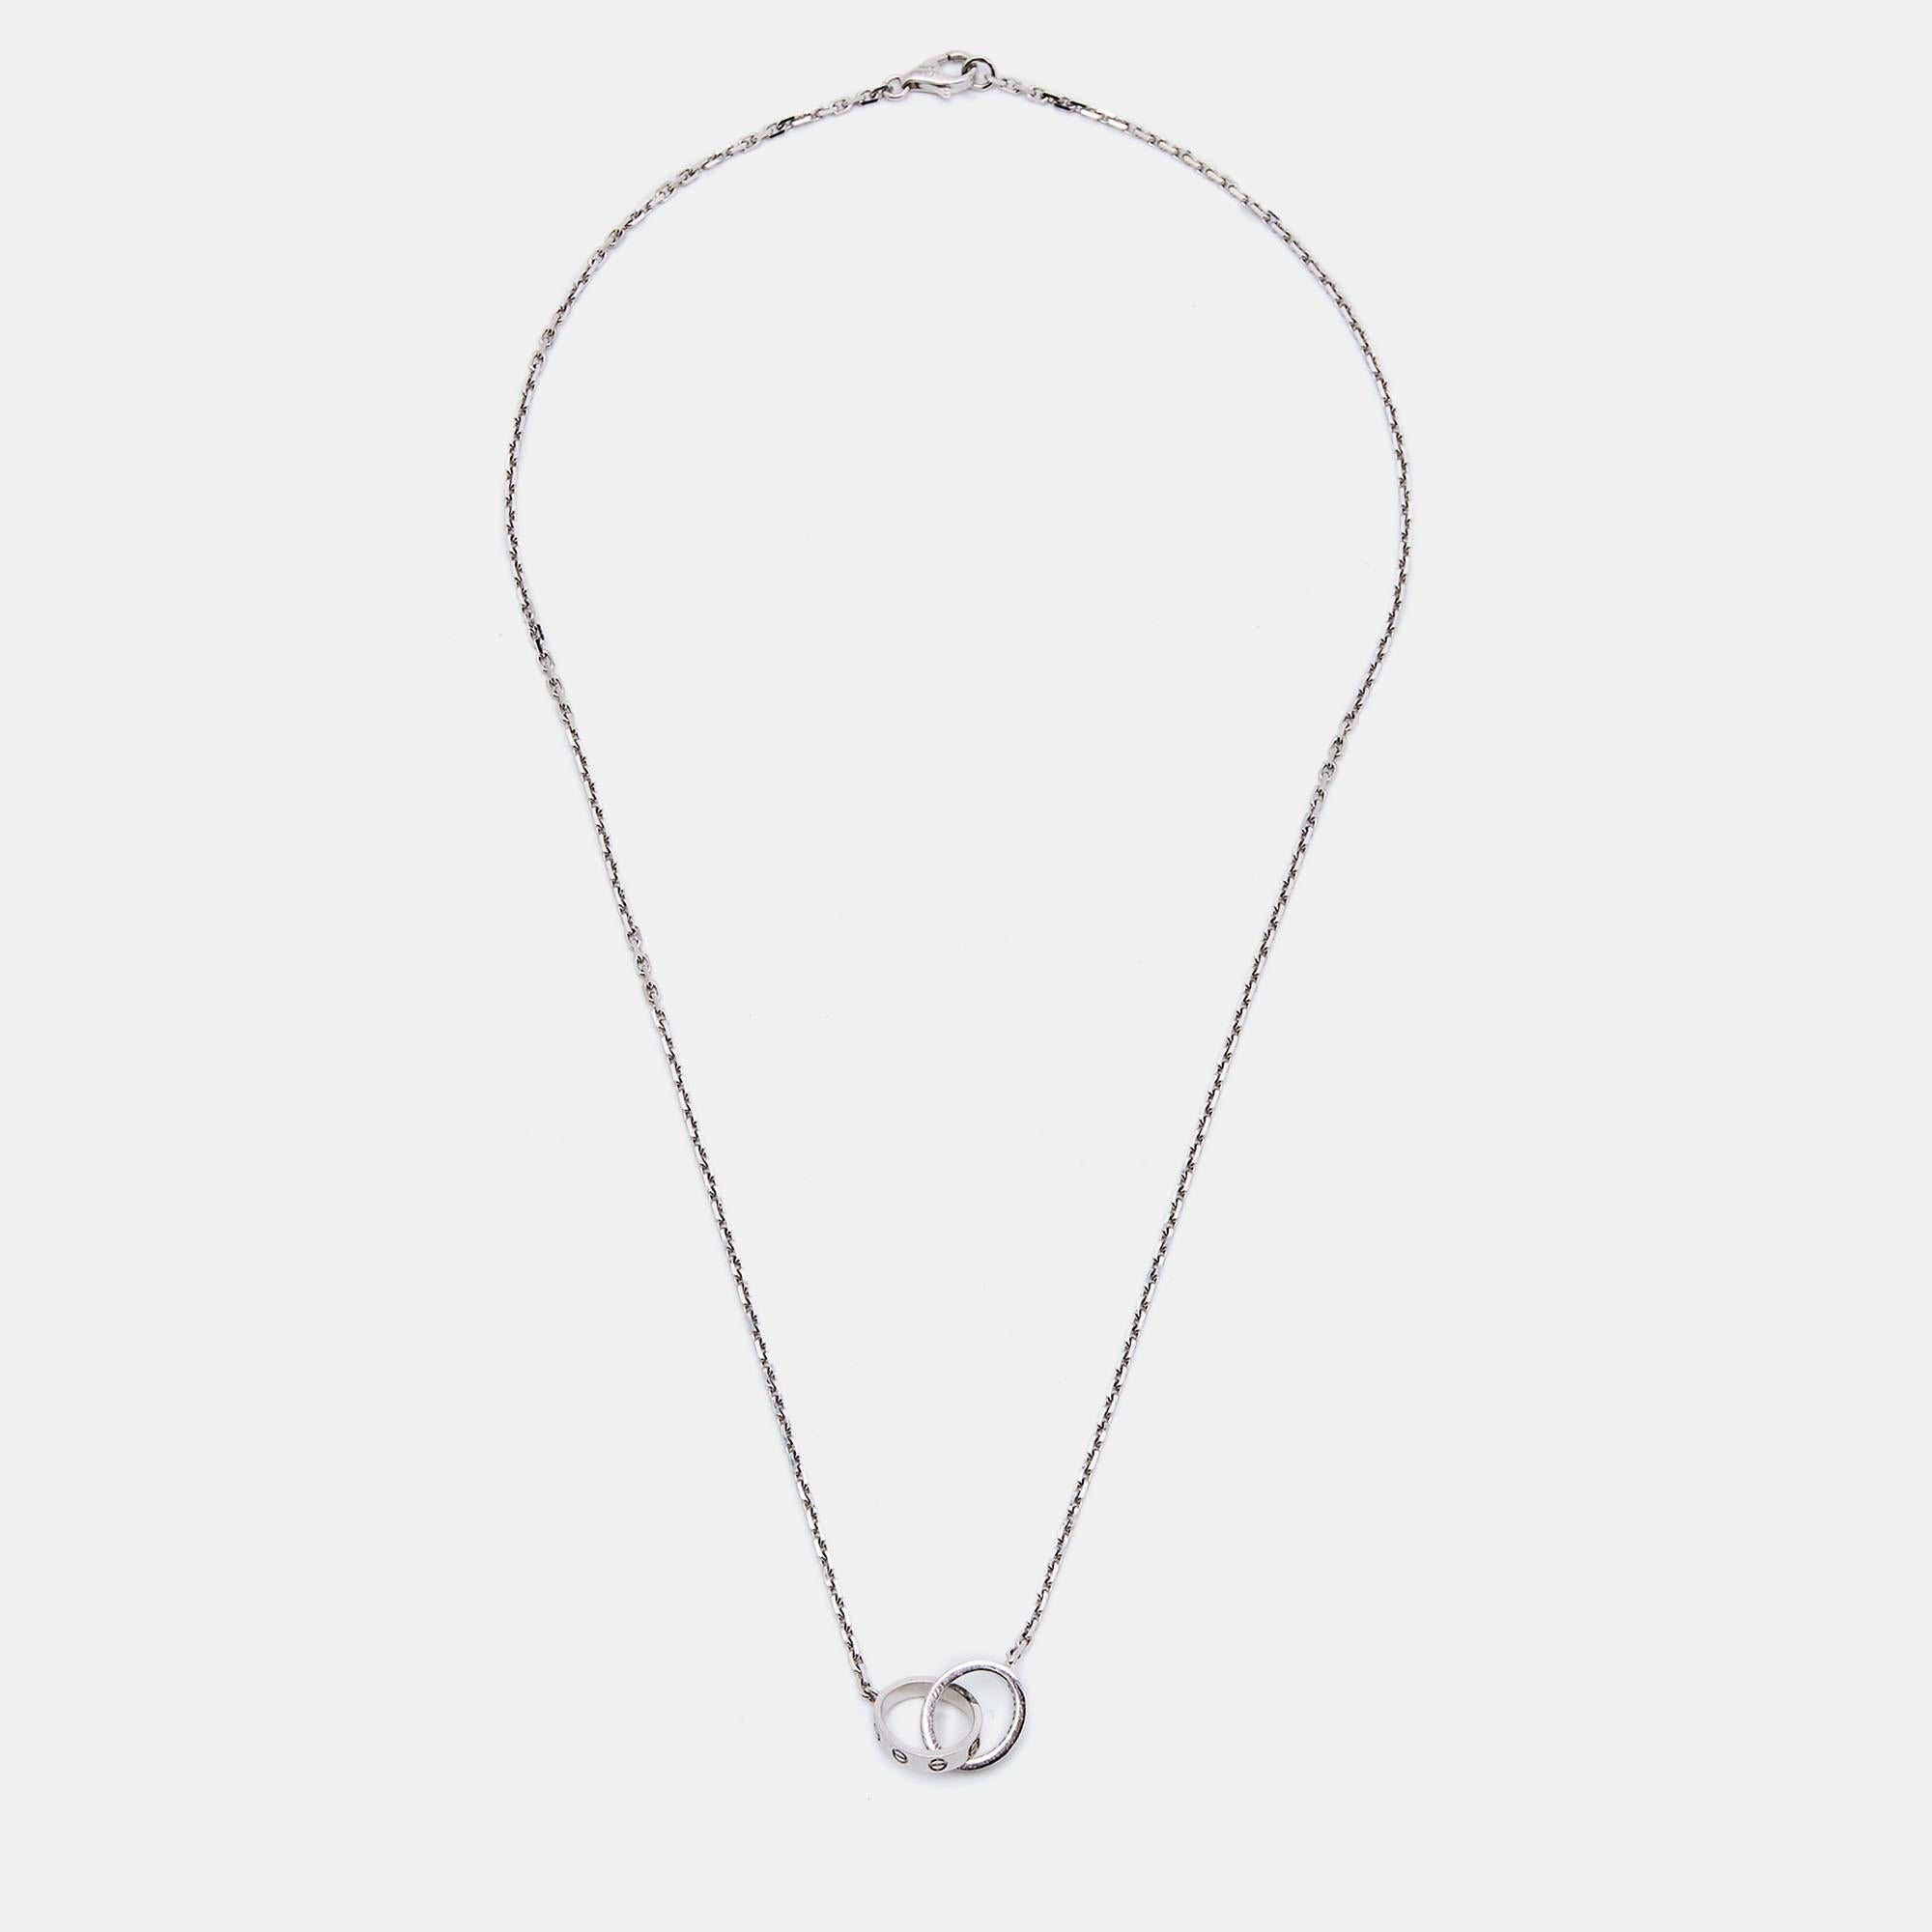 The Cartier Love necklace is an exquisite piece crafted from 18k white gold. It features interlocking rings adorned with brilliant-cut diamonds and screw motifs, exuding timeless elegance and sophistication. This necklace symbolizes eternal love and